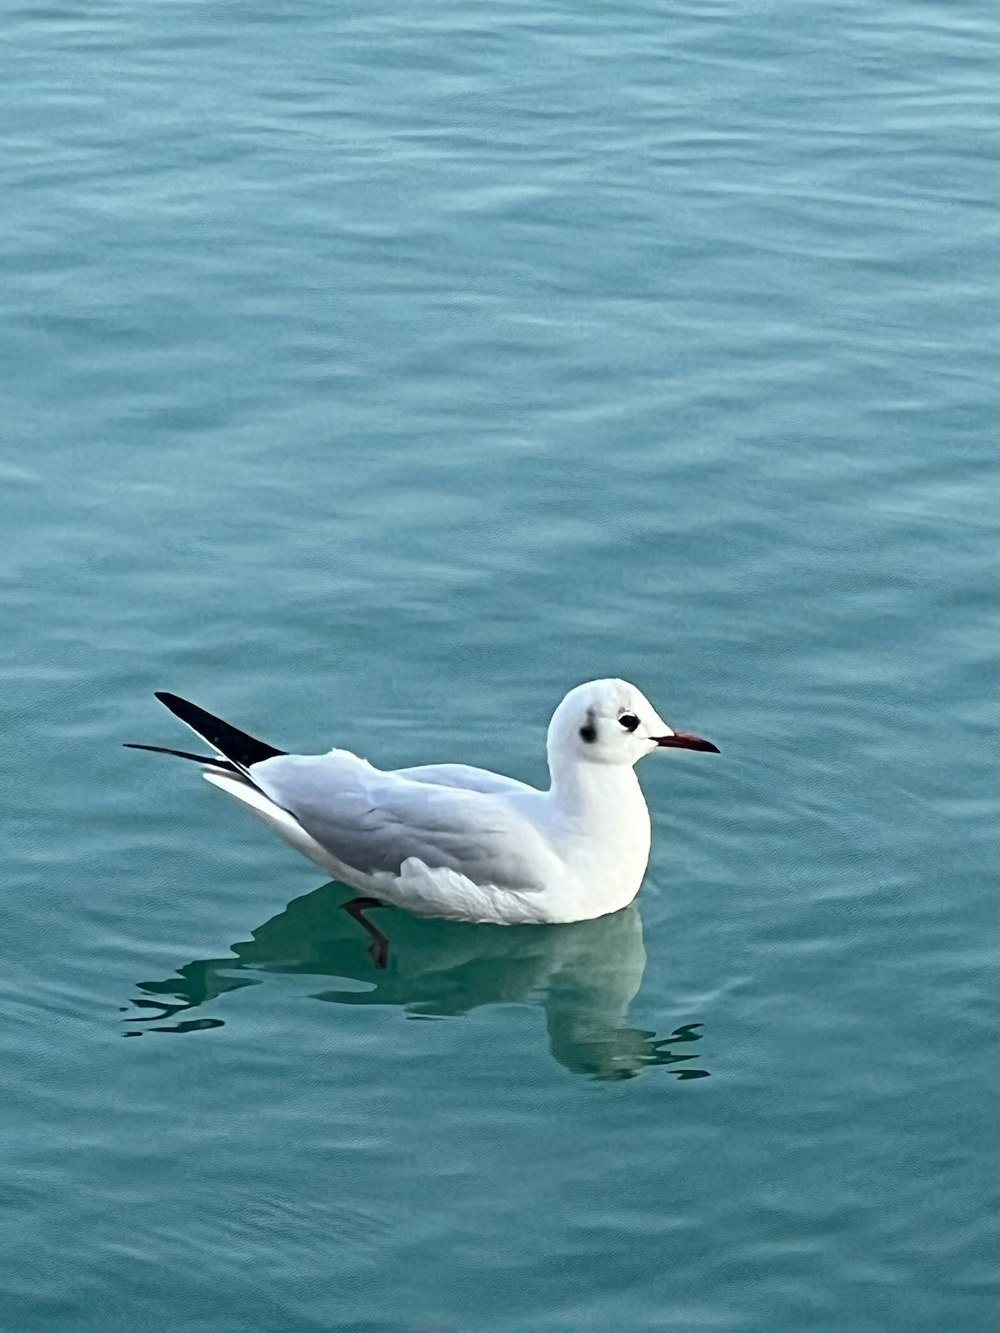 a seagull is swimming in a body of water